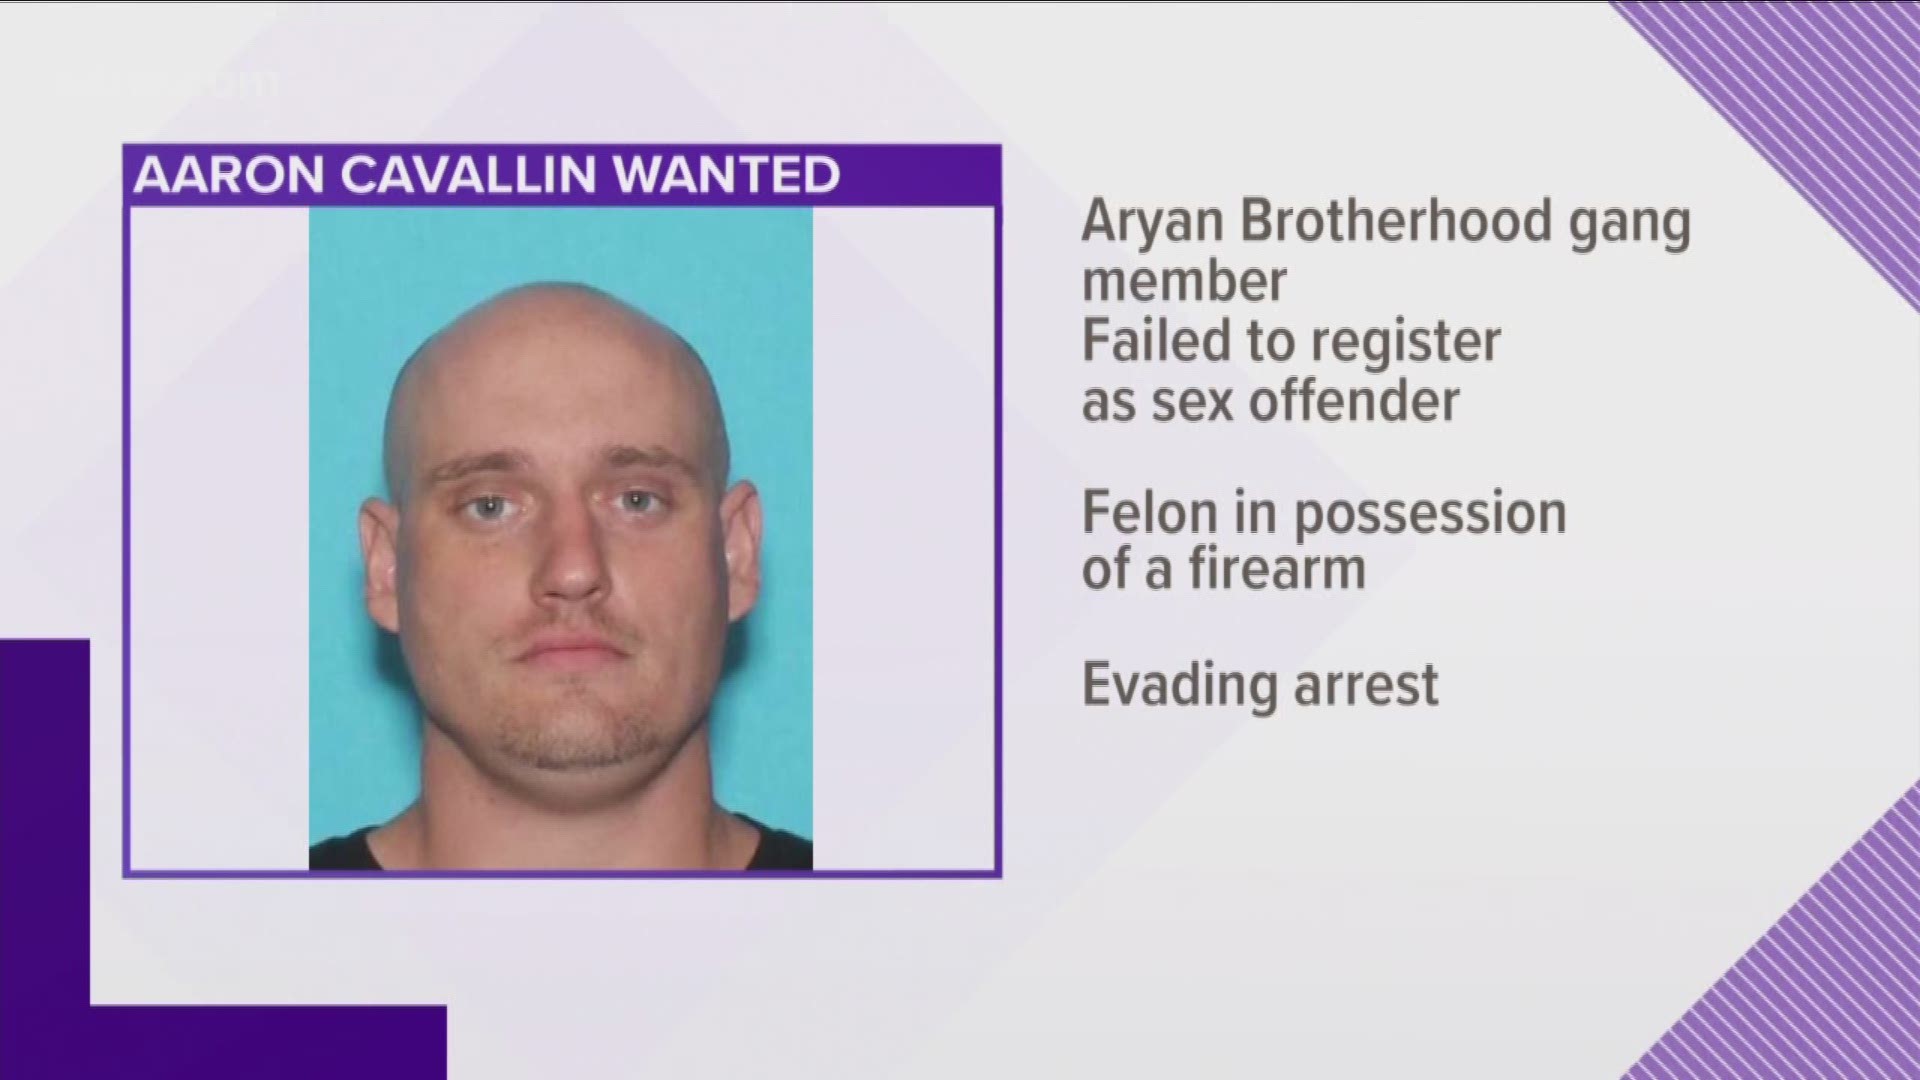 Police said Aaron Cavallin fled the scene of a disturbance near the Palms Apartments in Aransas Pass and was able to get away.